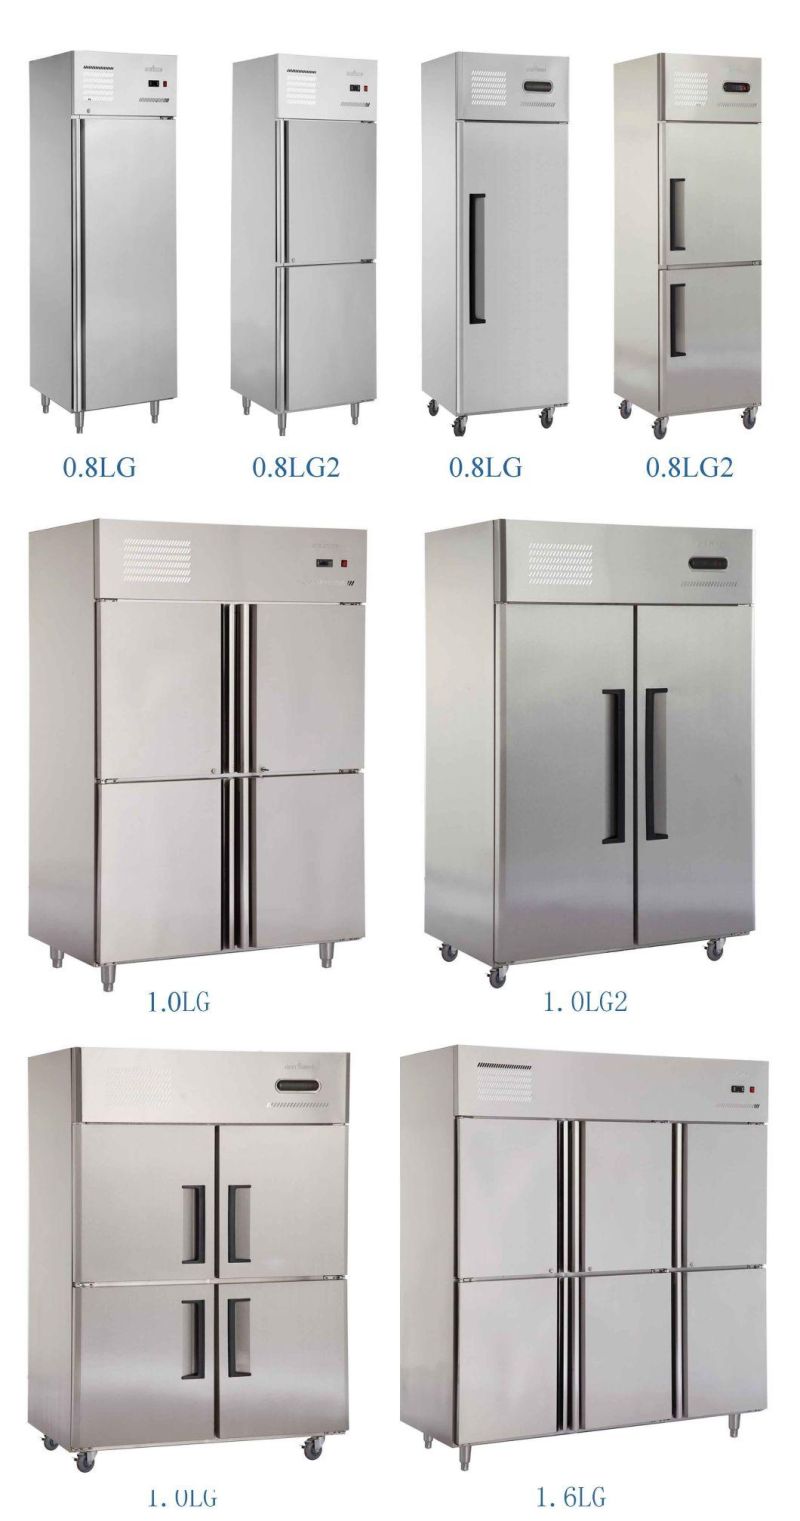 Cheering Undercounter Refrigerator High Quality 2.4m Work Top Chiller Cabinet